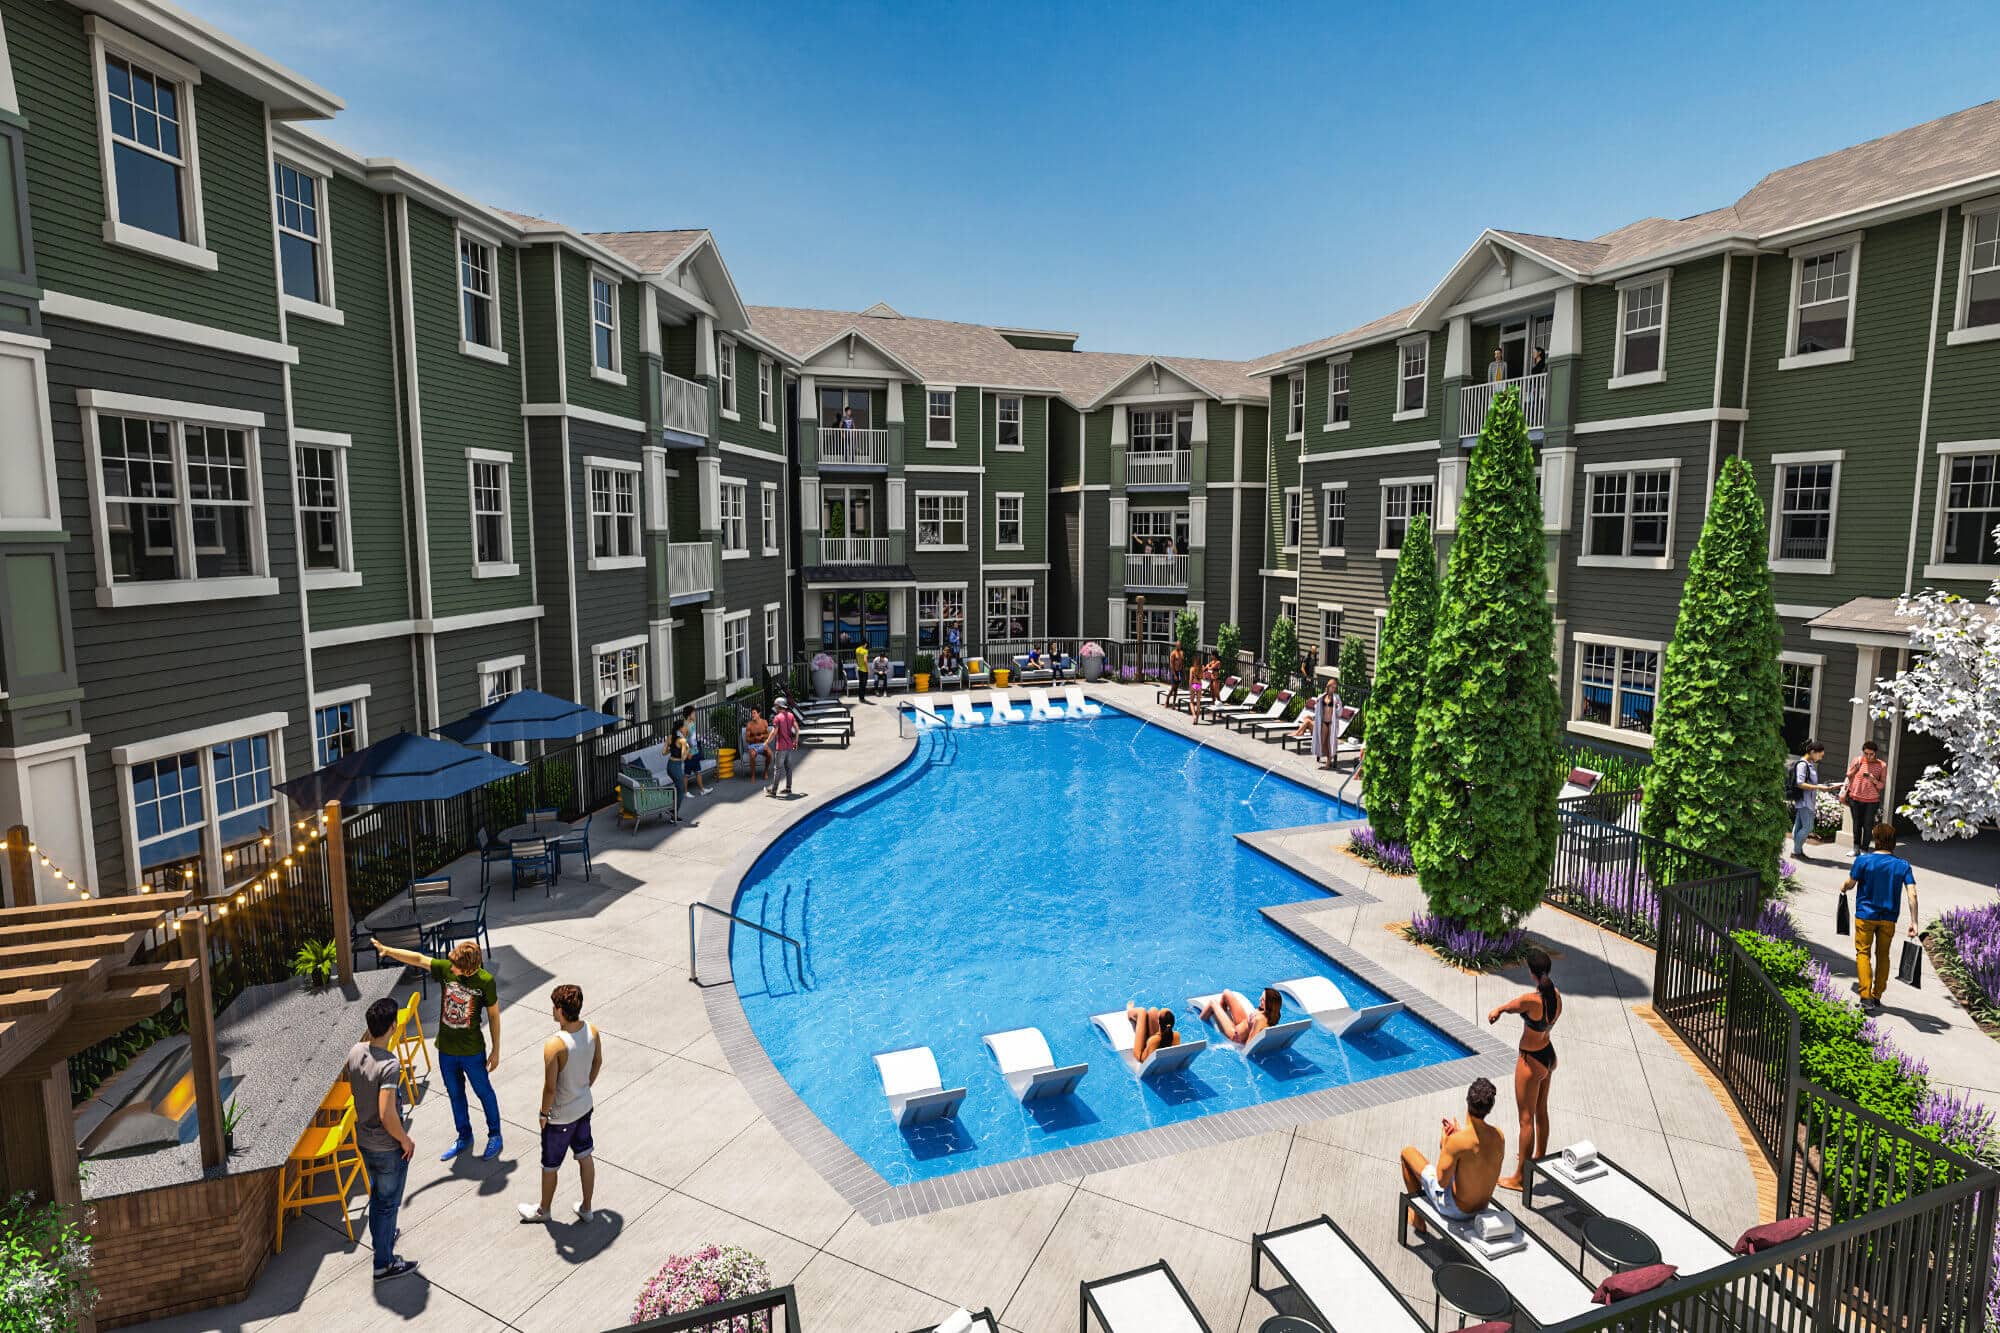 14 sixtyfive off campus apartments near kennesaw university resort style pool